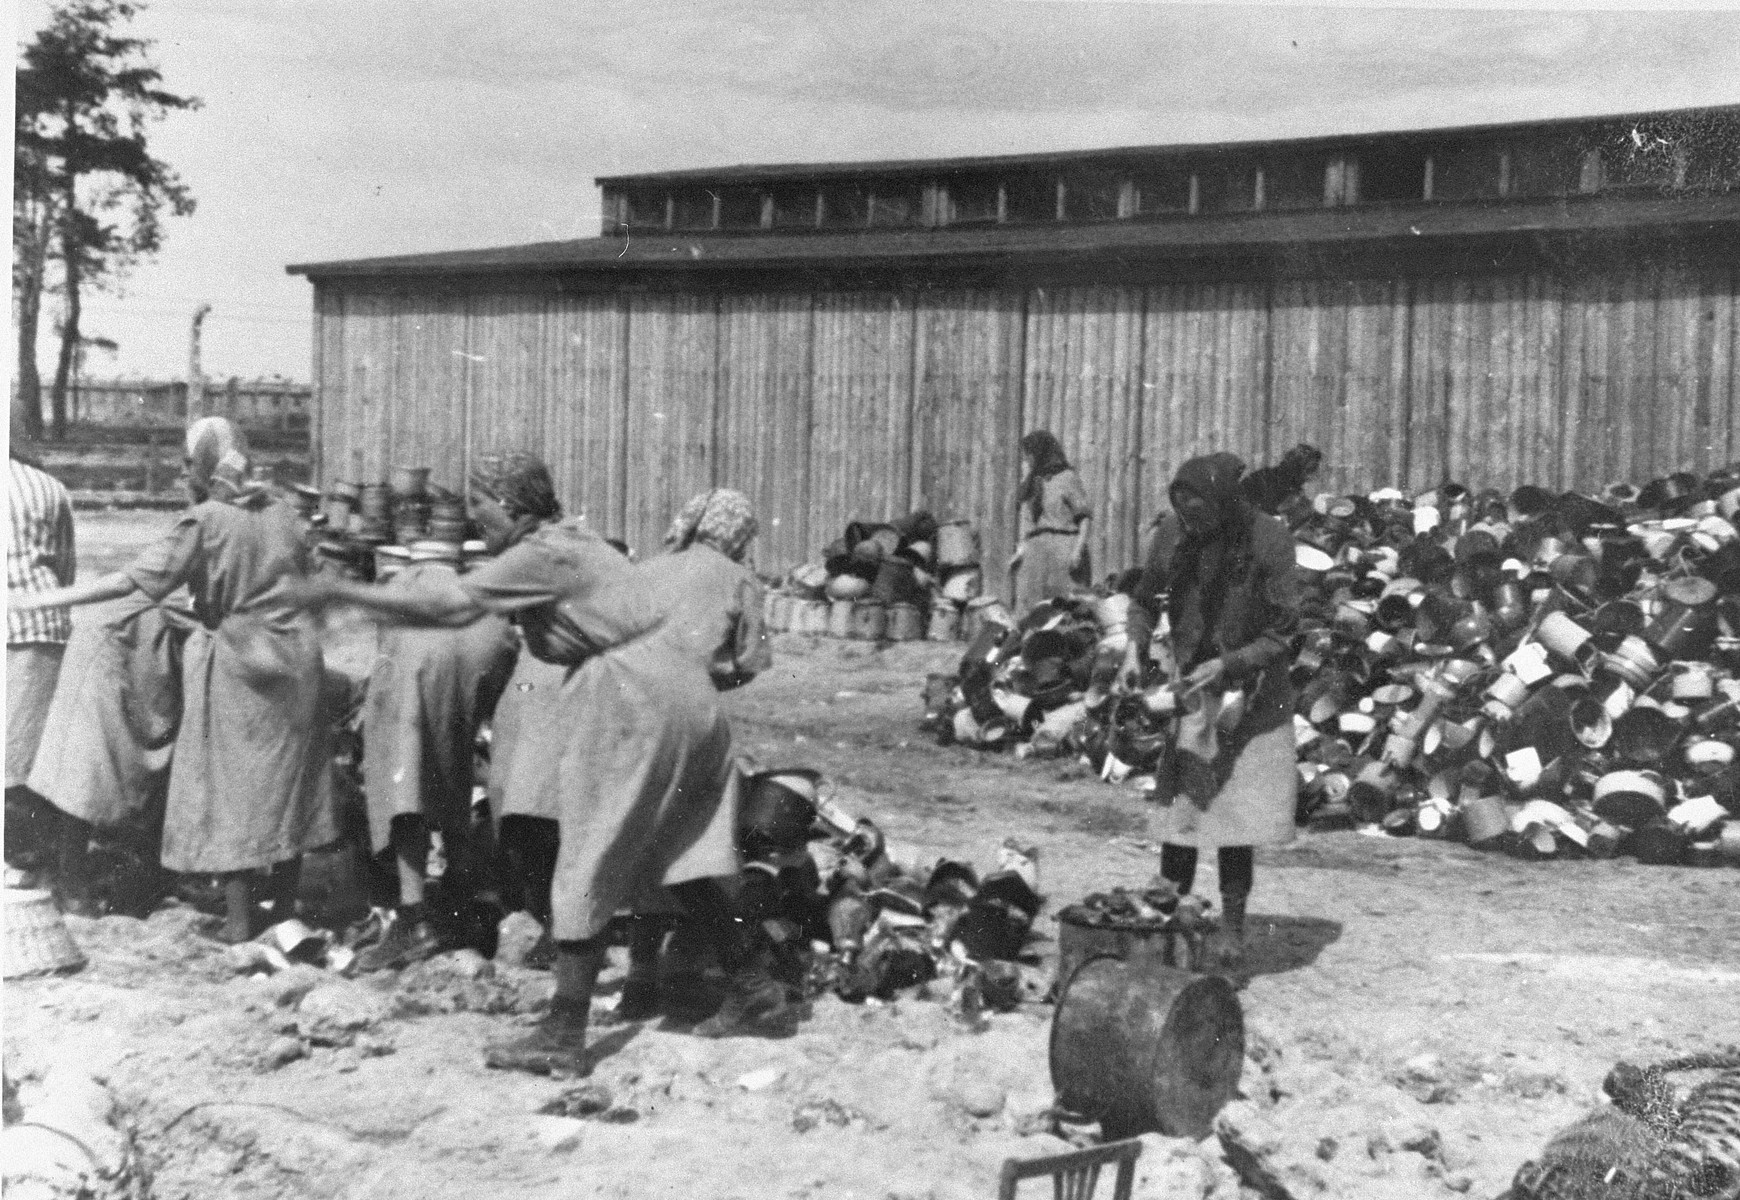 Prisoners in the Aufräumungskommando (order commandos) sort the confiscated property of a transport of Jews from Subcarpathian Rus at a warehouse in Auschwitz-Birkenau.

The camp prisoners came to refer to the looted property as "Canada," associating it with the riches symbolized by Canada.  The members of this commando were almost exclusively Jews.  "Canada" storage facilities occupied several dozen barracks and other buildings around the camp.  The looted property was funneled from Auschwitz through an extensive distribution network that served many individuals and various economic branches of the Third Reich.